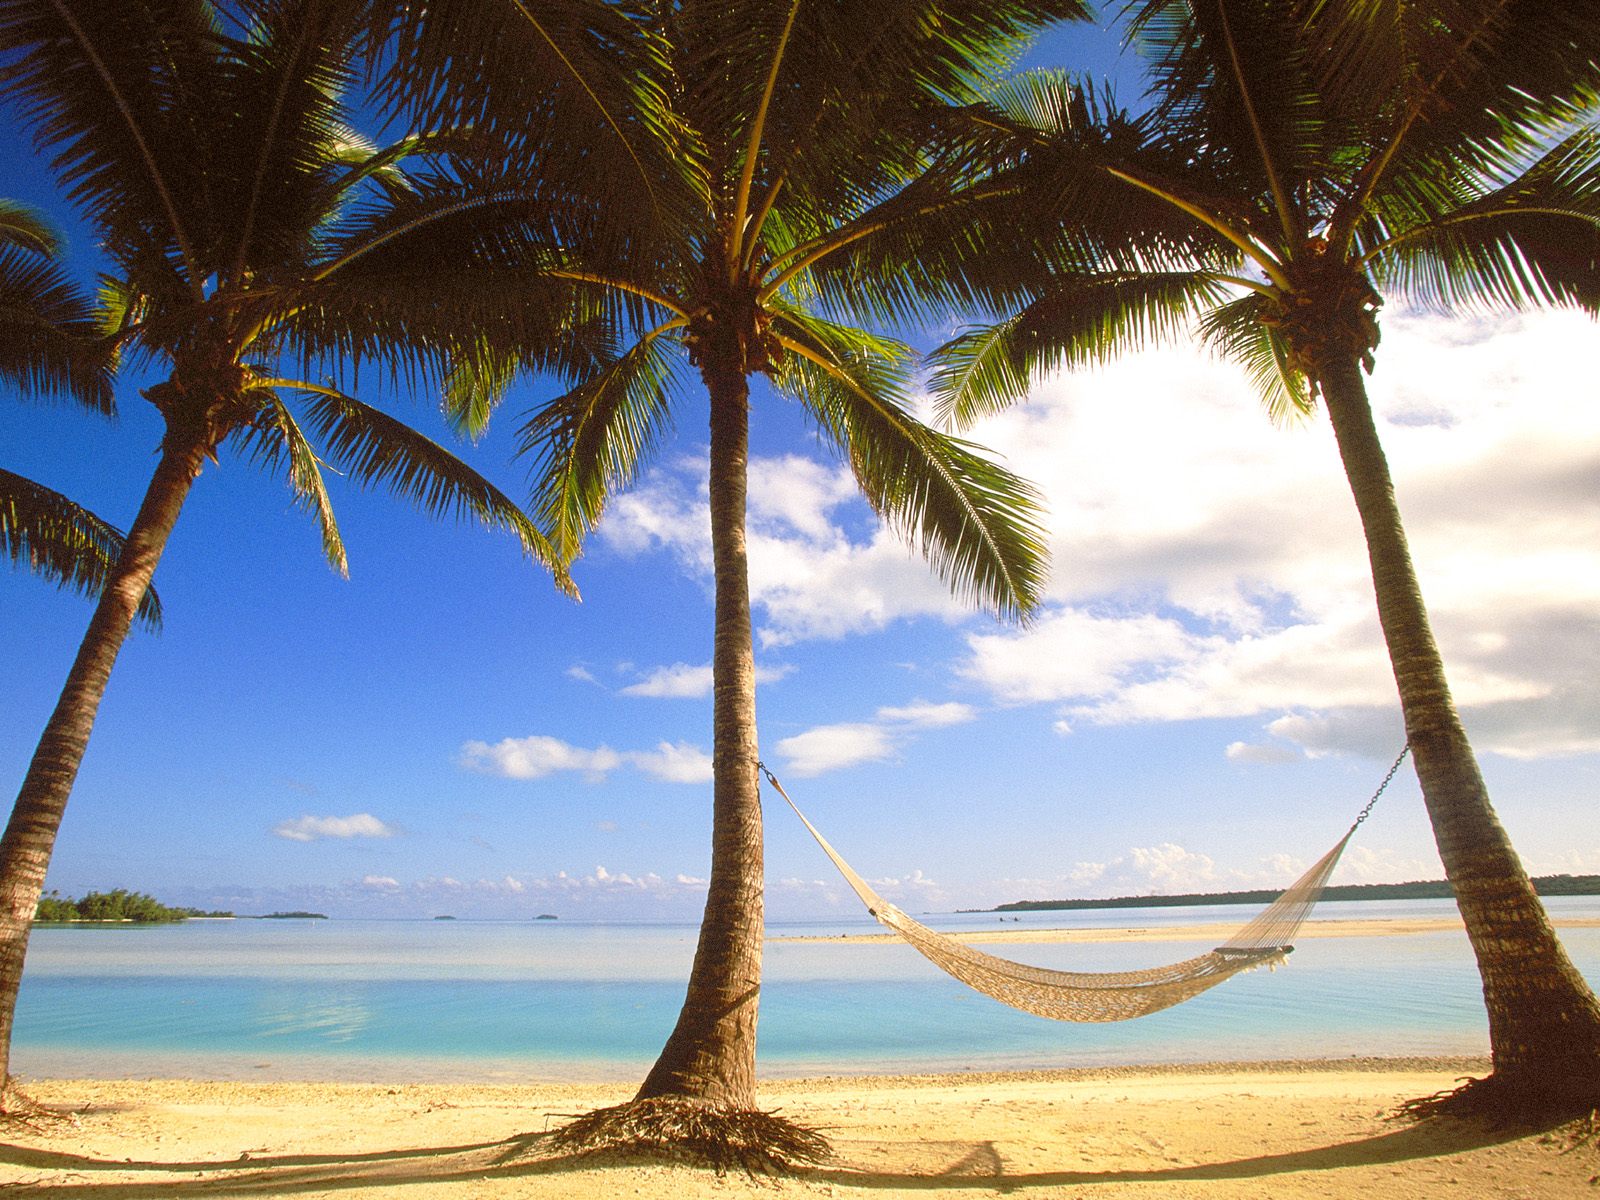 Palm tree and hammock in a tropical paradise.